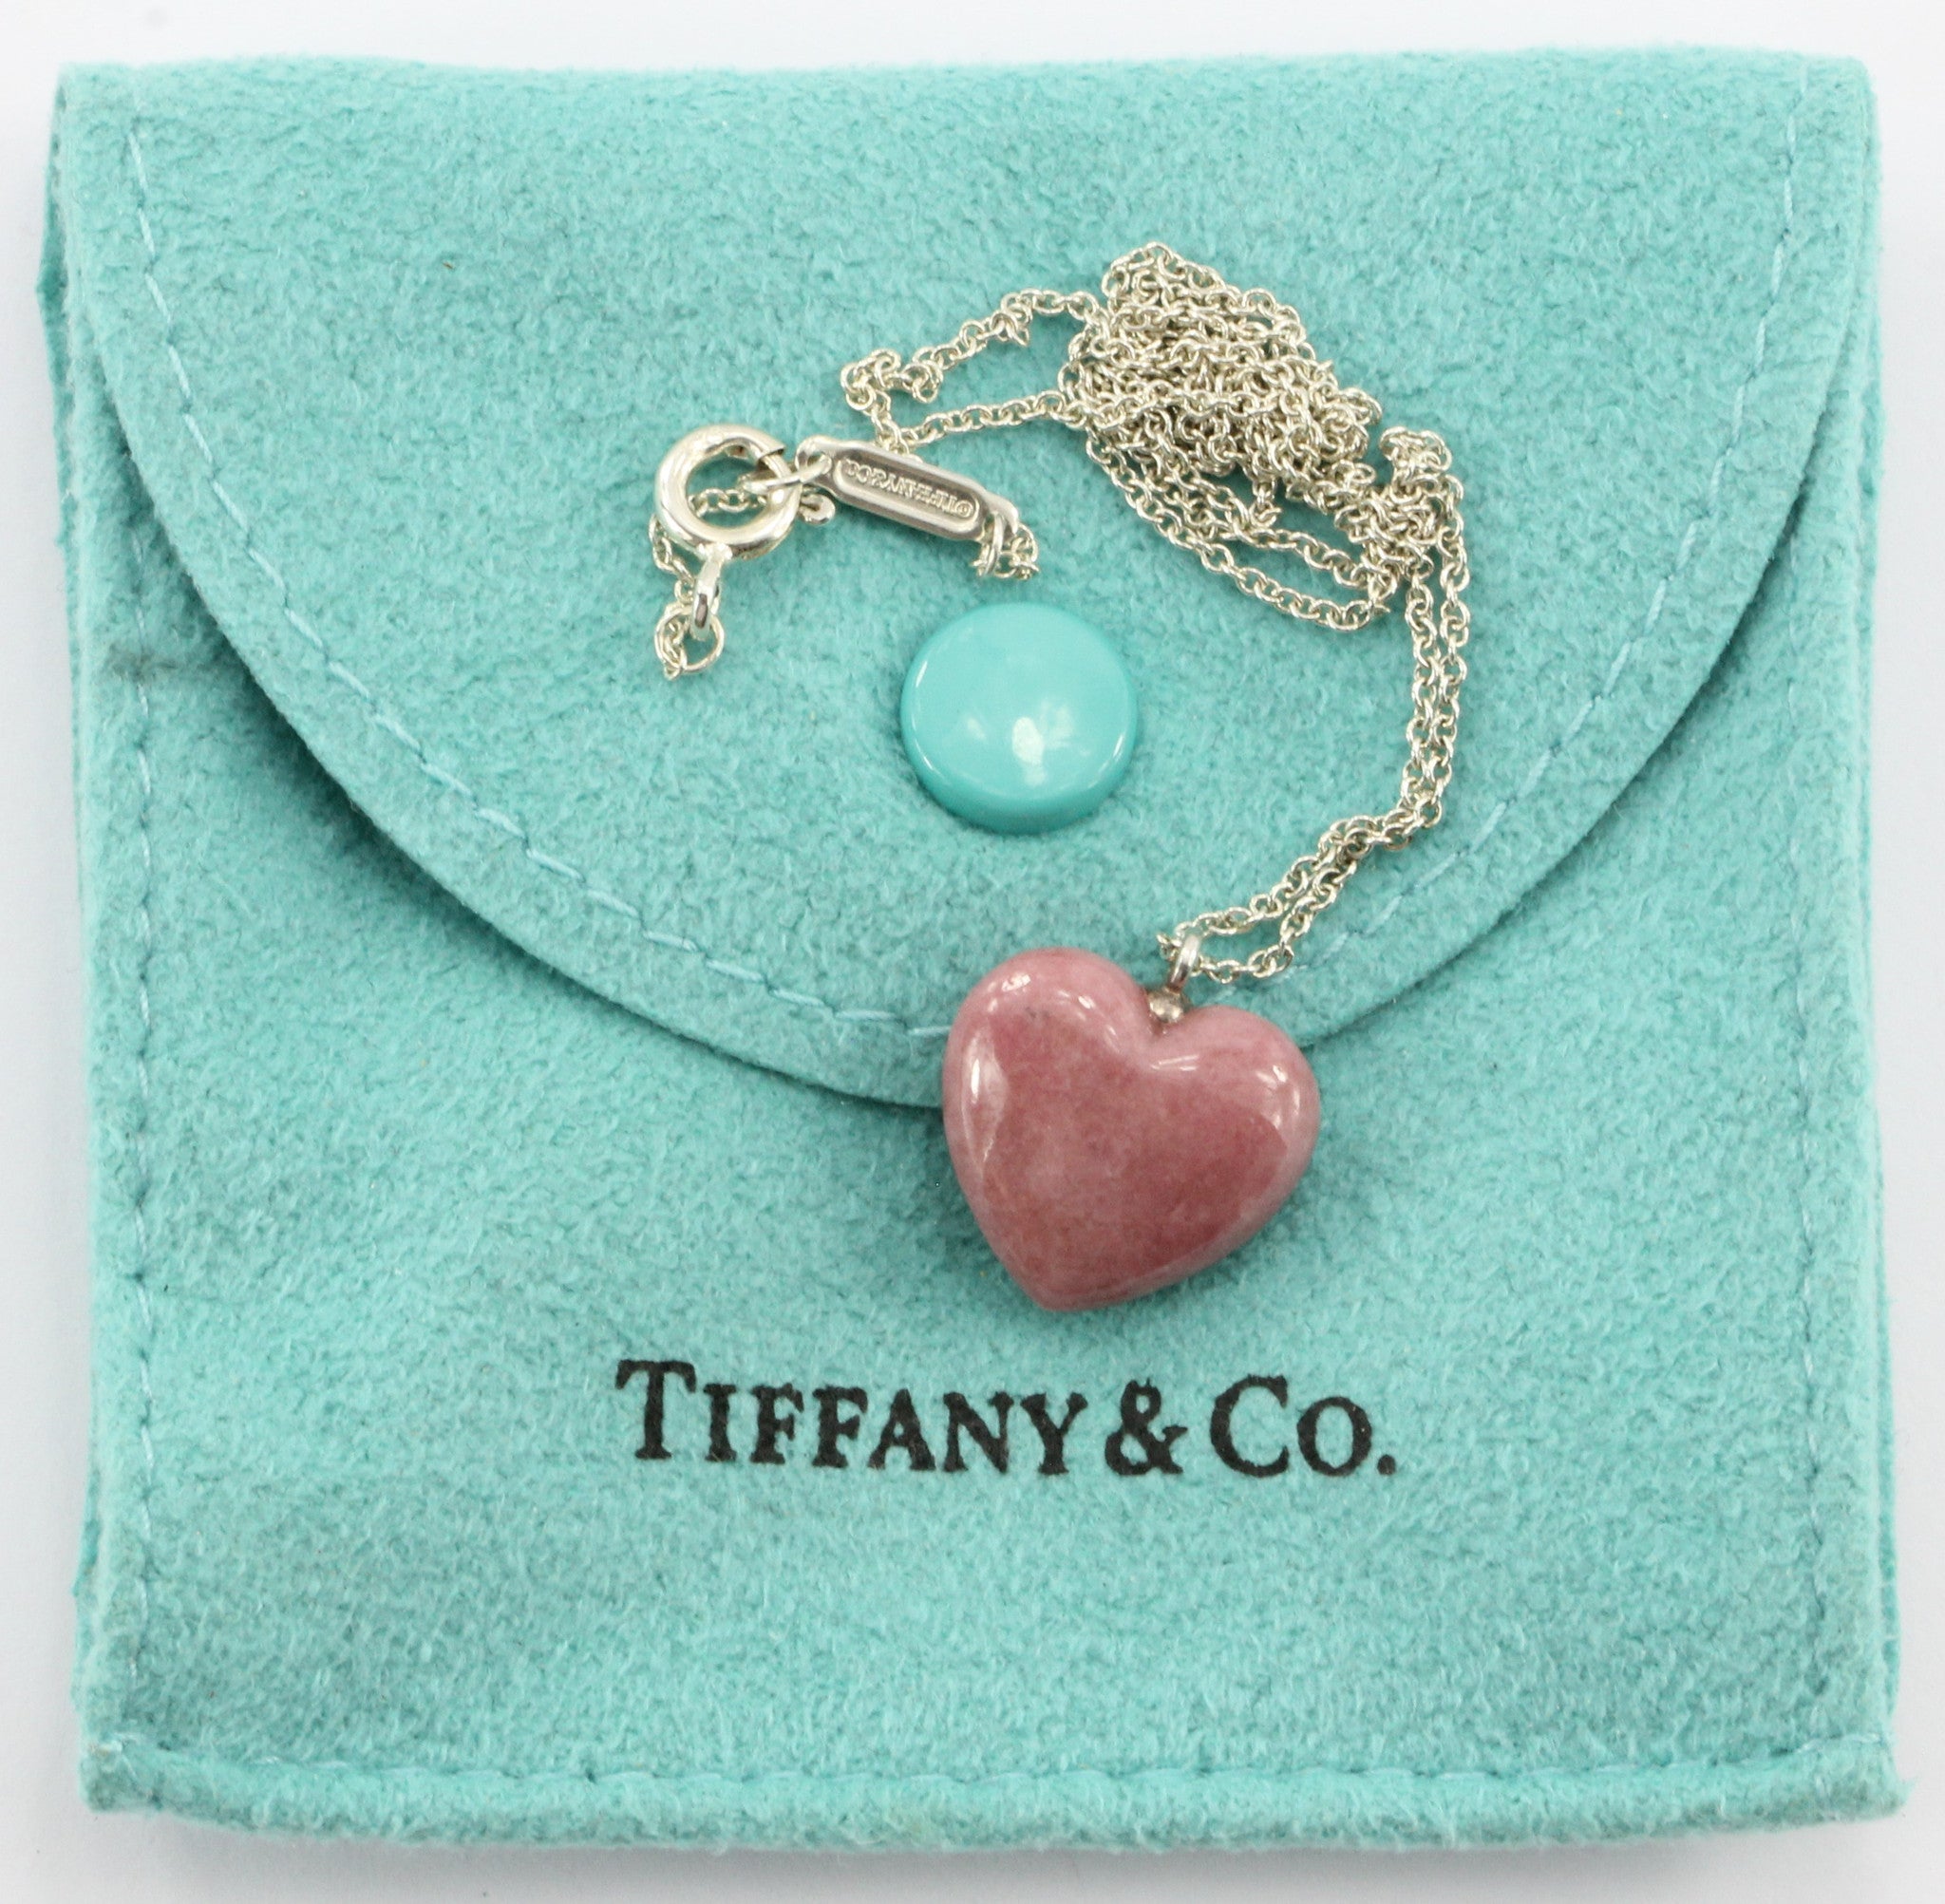 Return to Tiffany & Co. Mother of Pearl Double Heart Pendant Necklace, 16